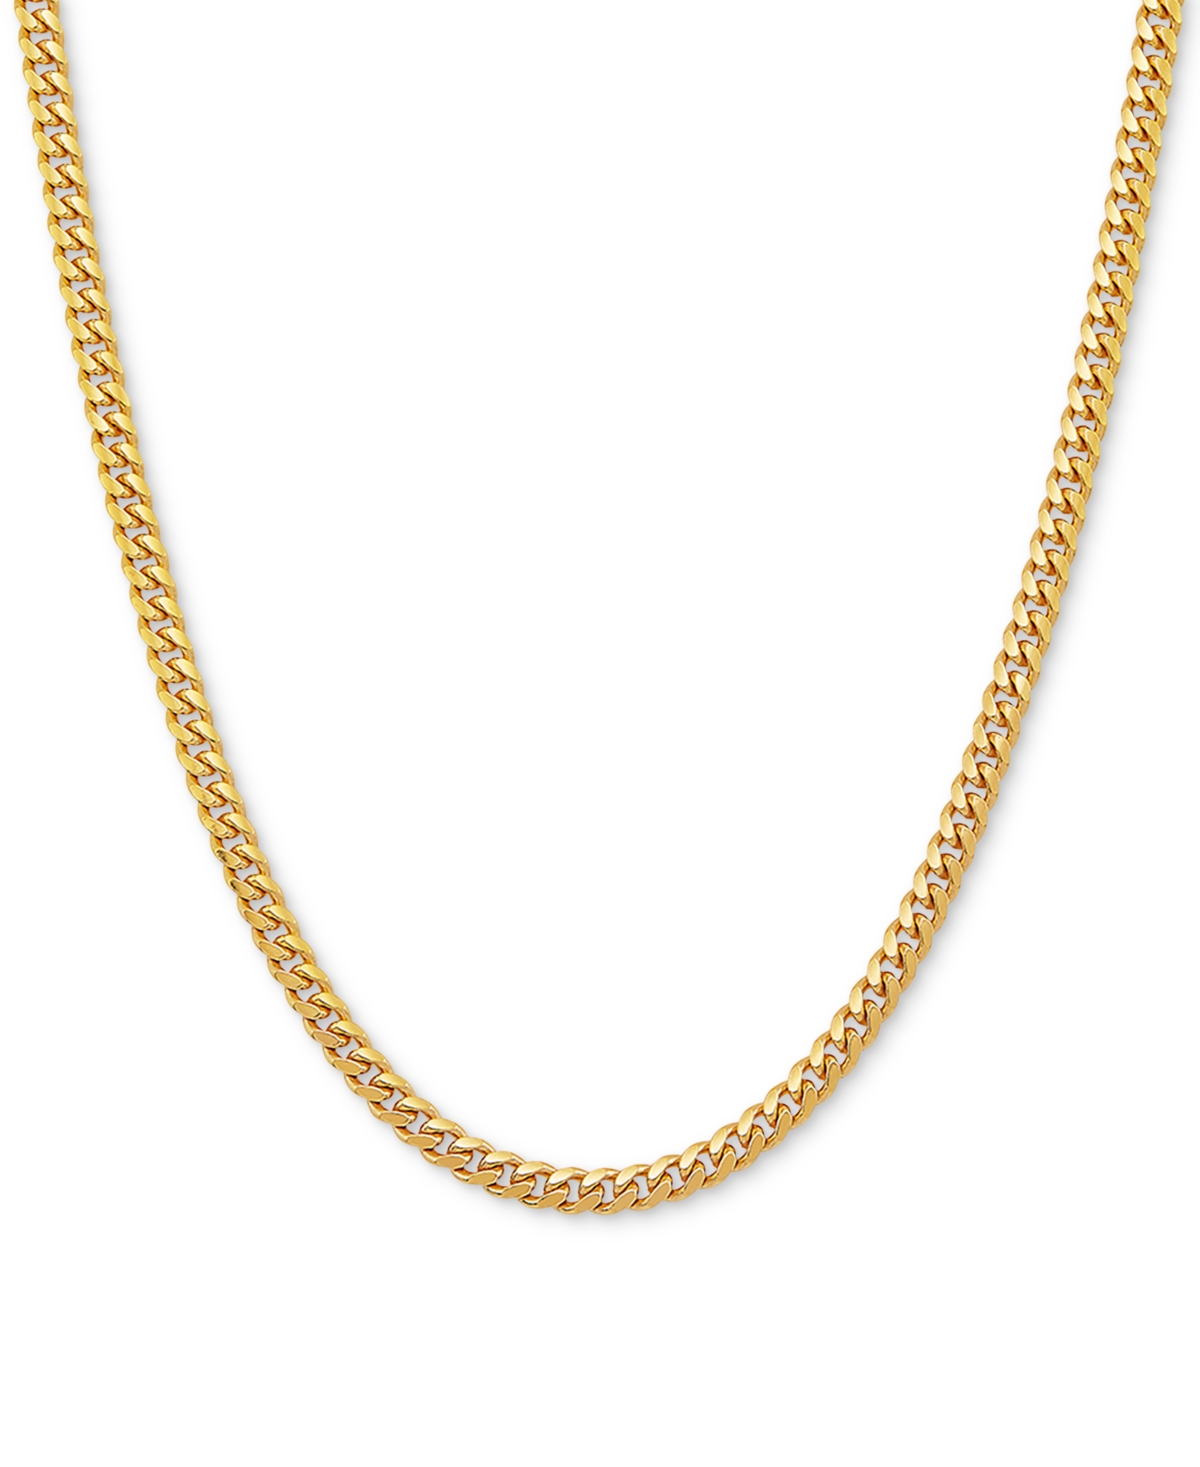 Curb Link 18" Chain Necklace in Sterling Silver or 18k Gold-Plated Over Sterling Silver - Gold Over Silver